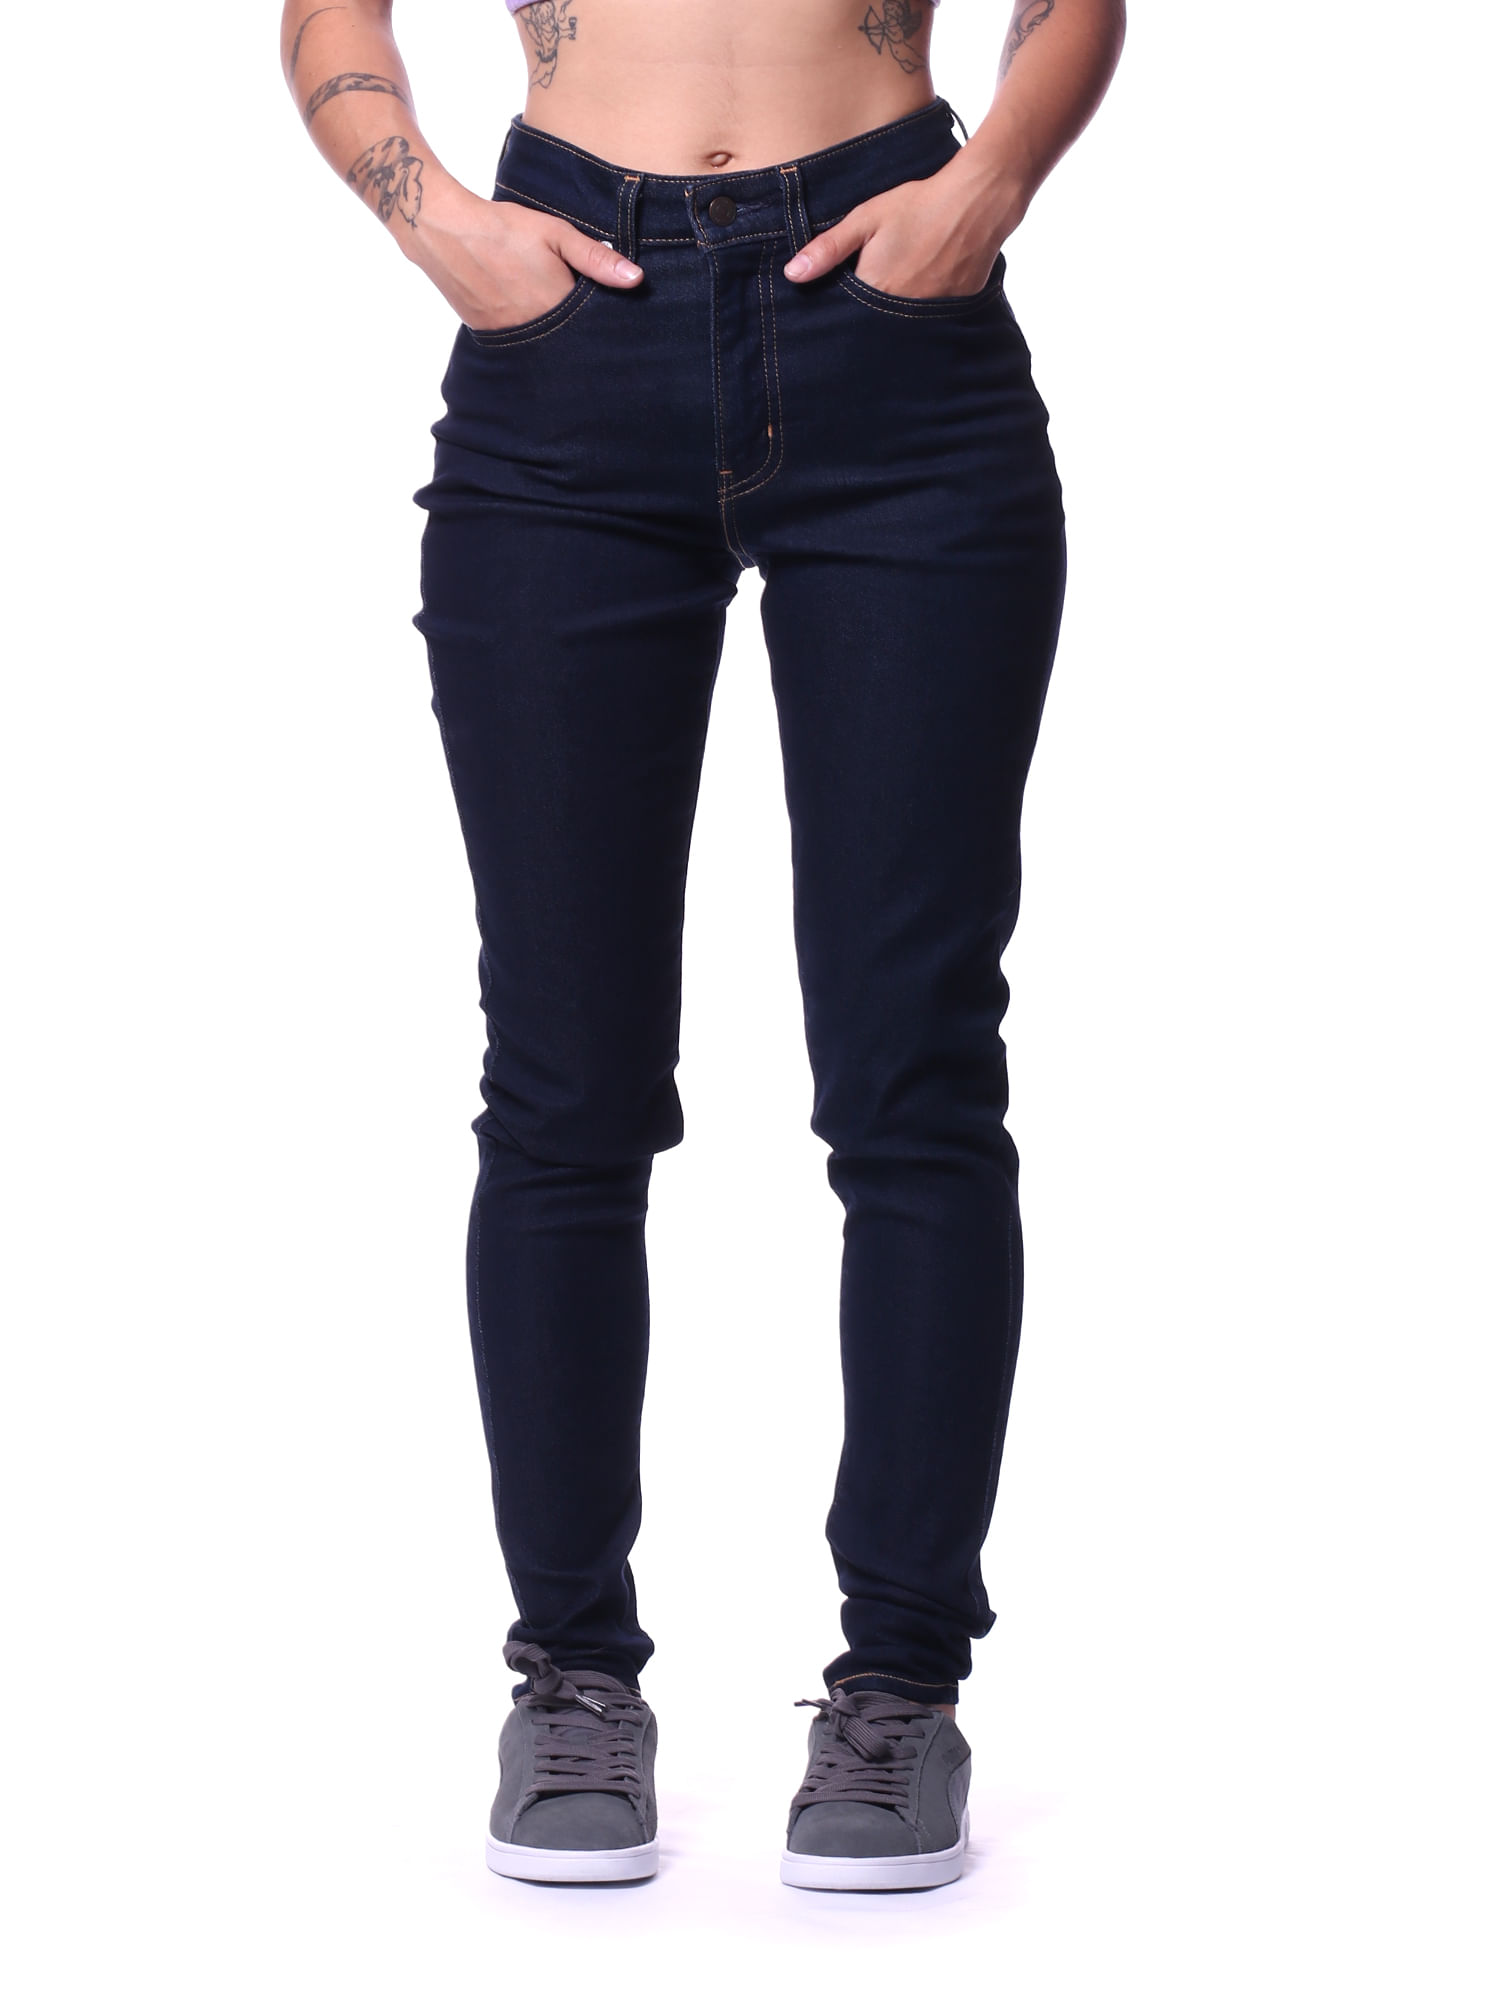 Calca-jeans-levi-s-721-high-rise-skinny-Jeans-escuro